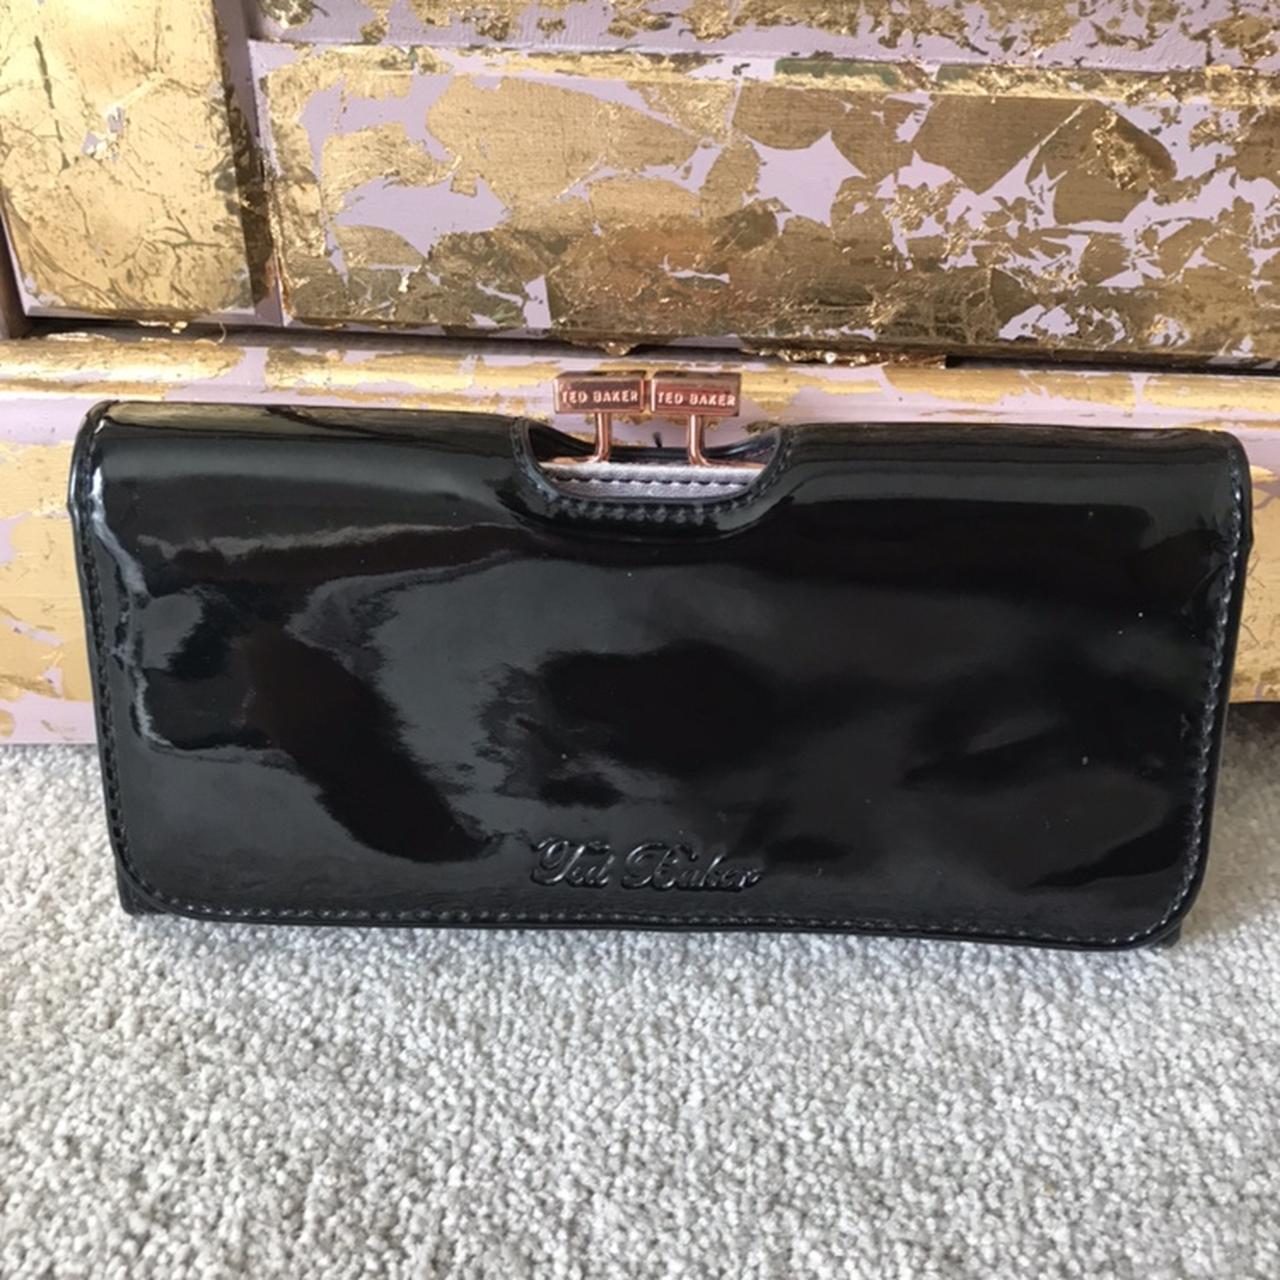 Ted Baker Bags Nikkey - Buy Online at Pettits, est 1860